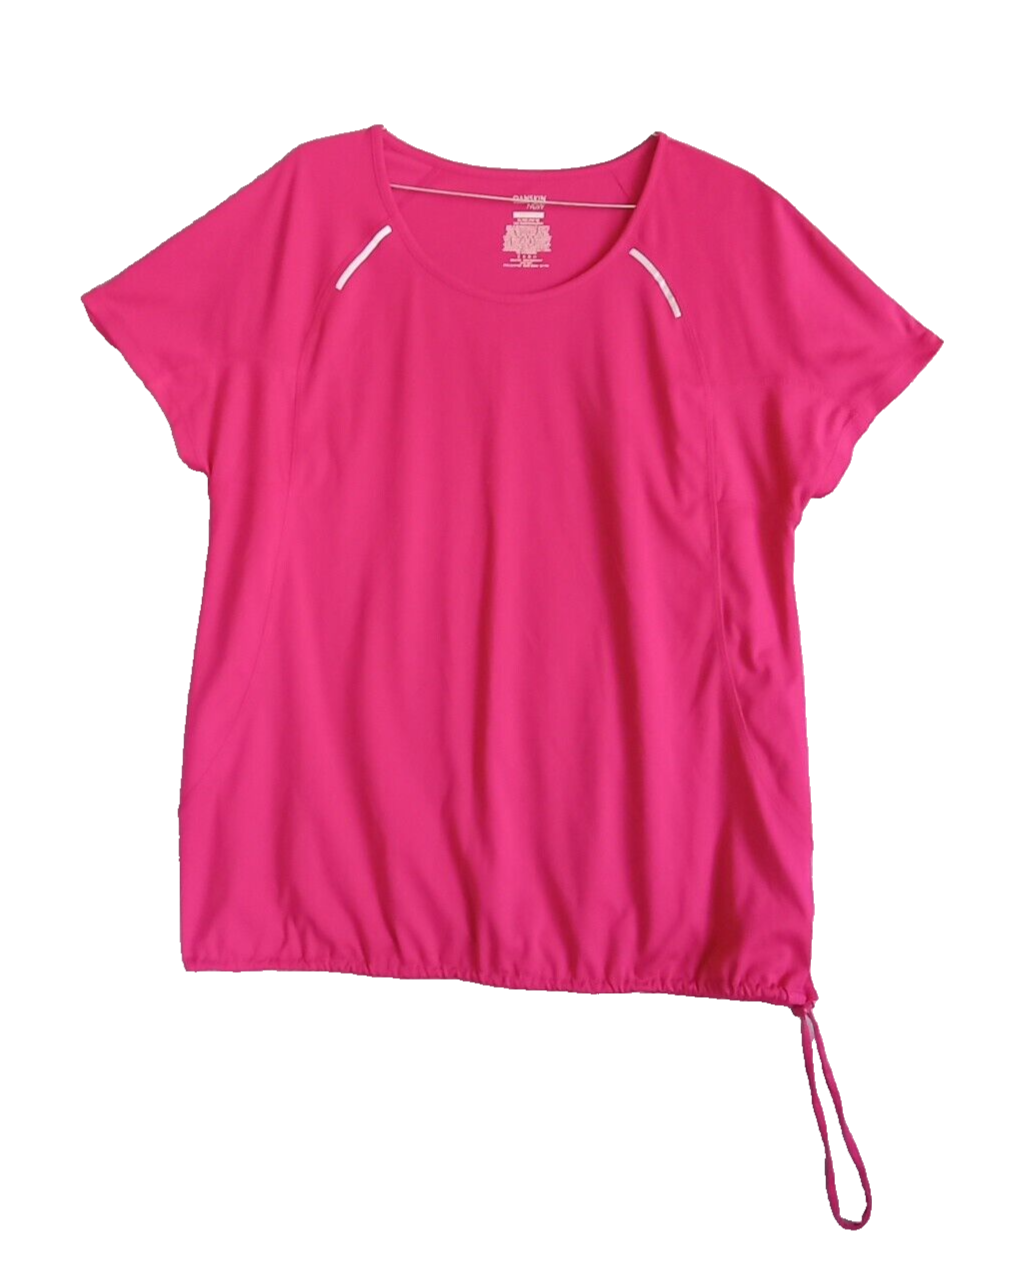 Primary image for Danskin Now Womens Top Shirt Pink XL 16-18 Cap Sleeve Scoop Neck Semi-Fitted